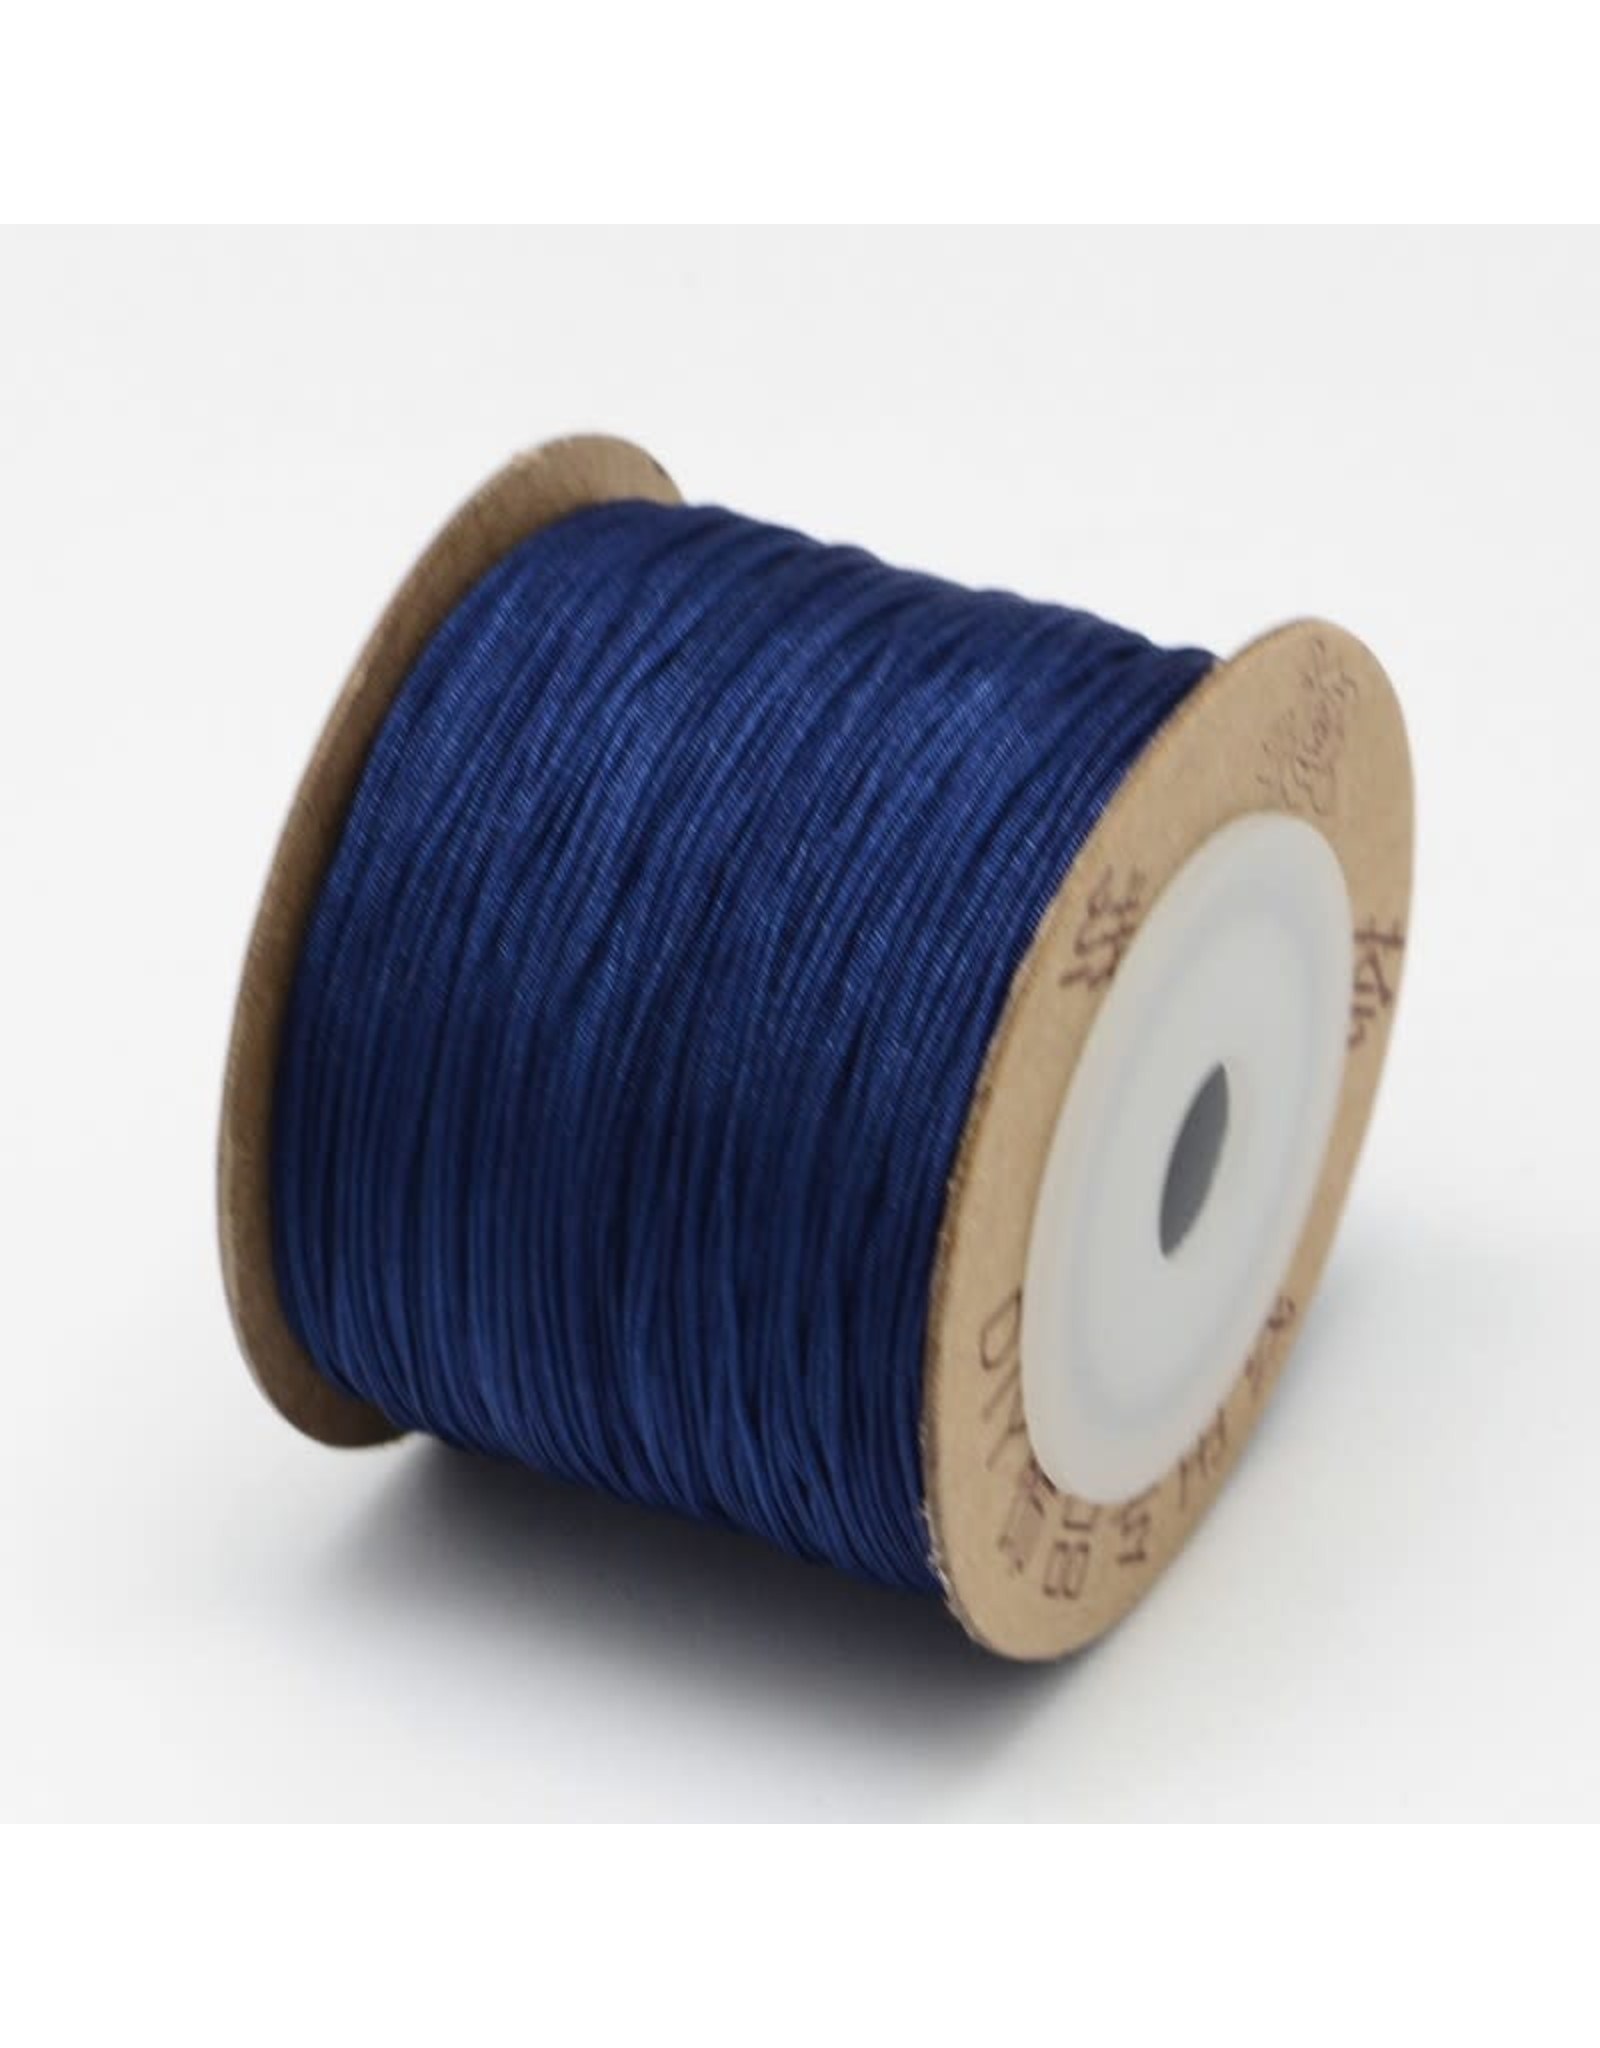 Chinese Knotting Cord .8mm Navy Blue x100m